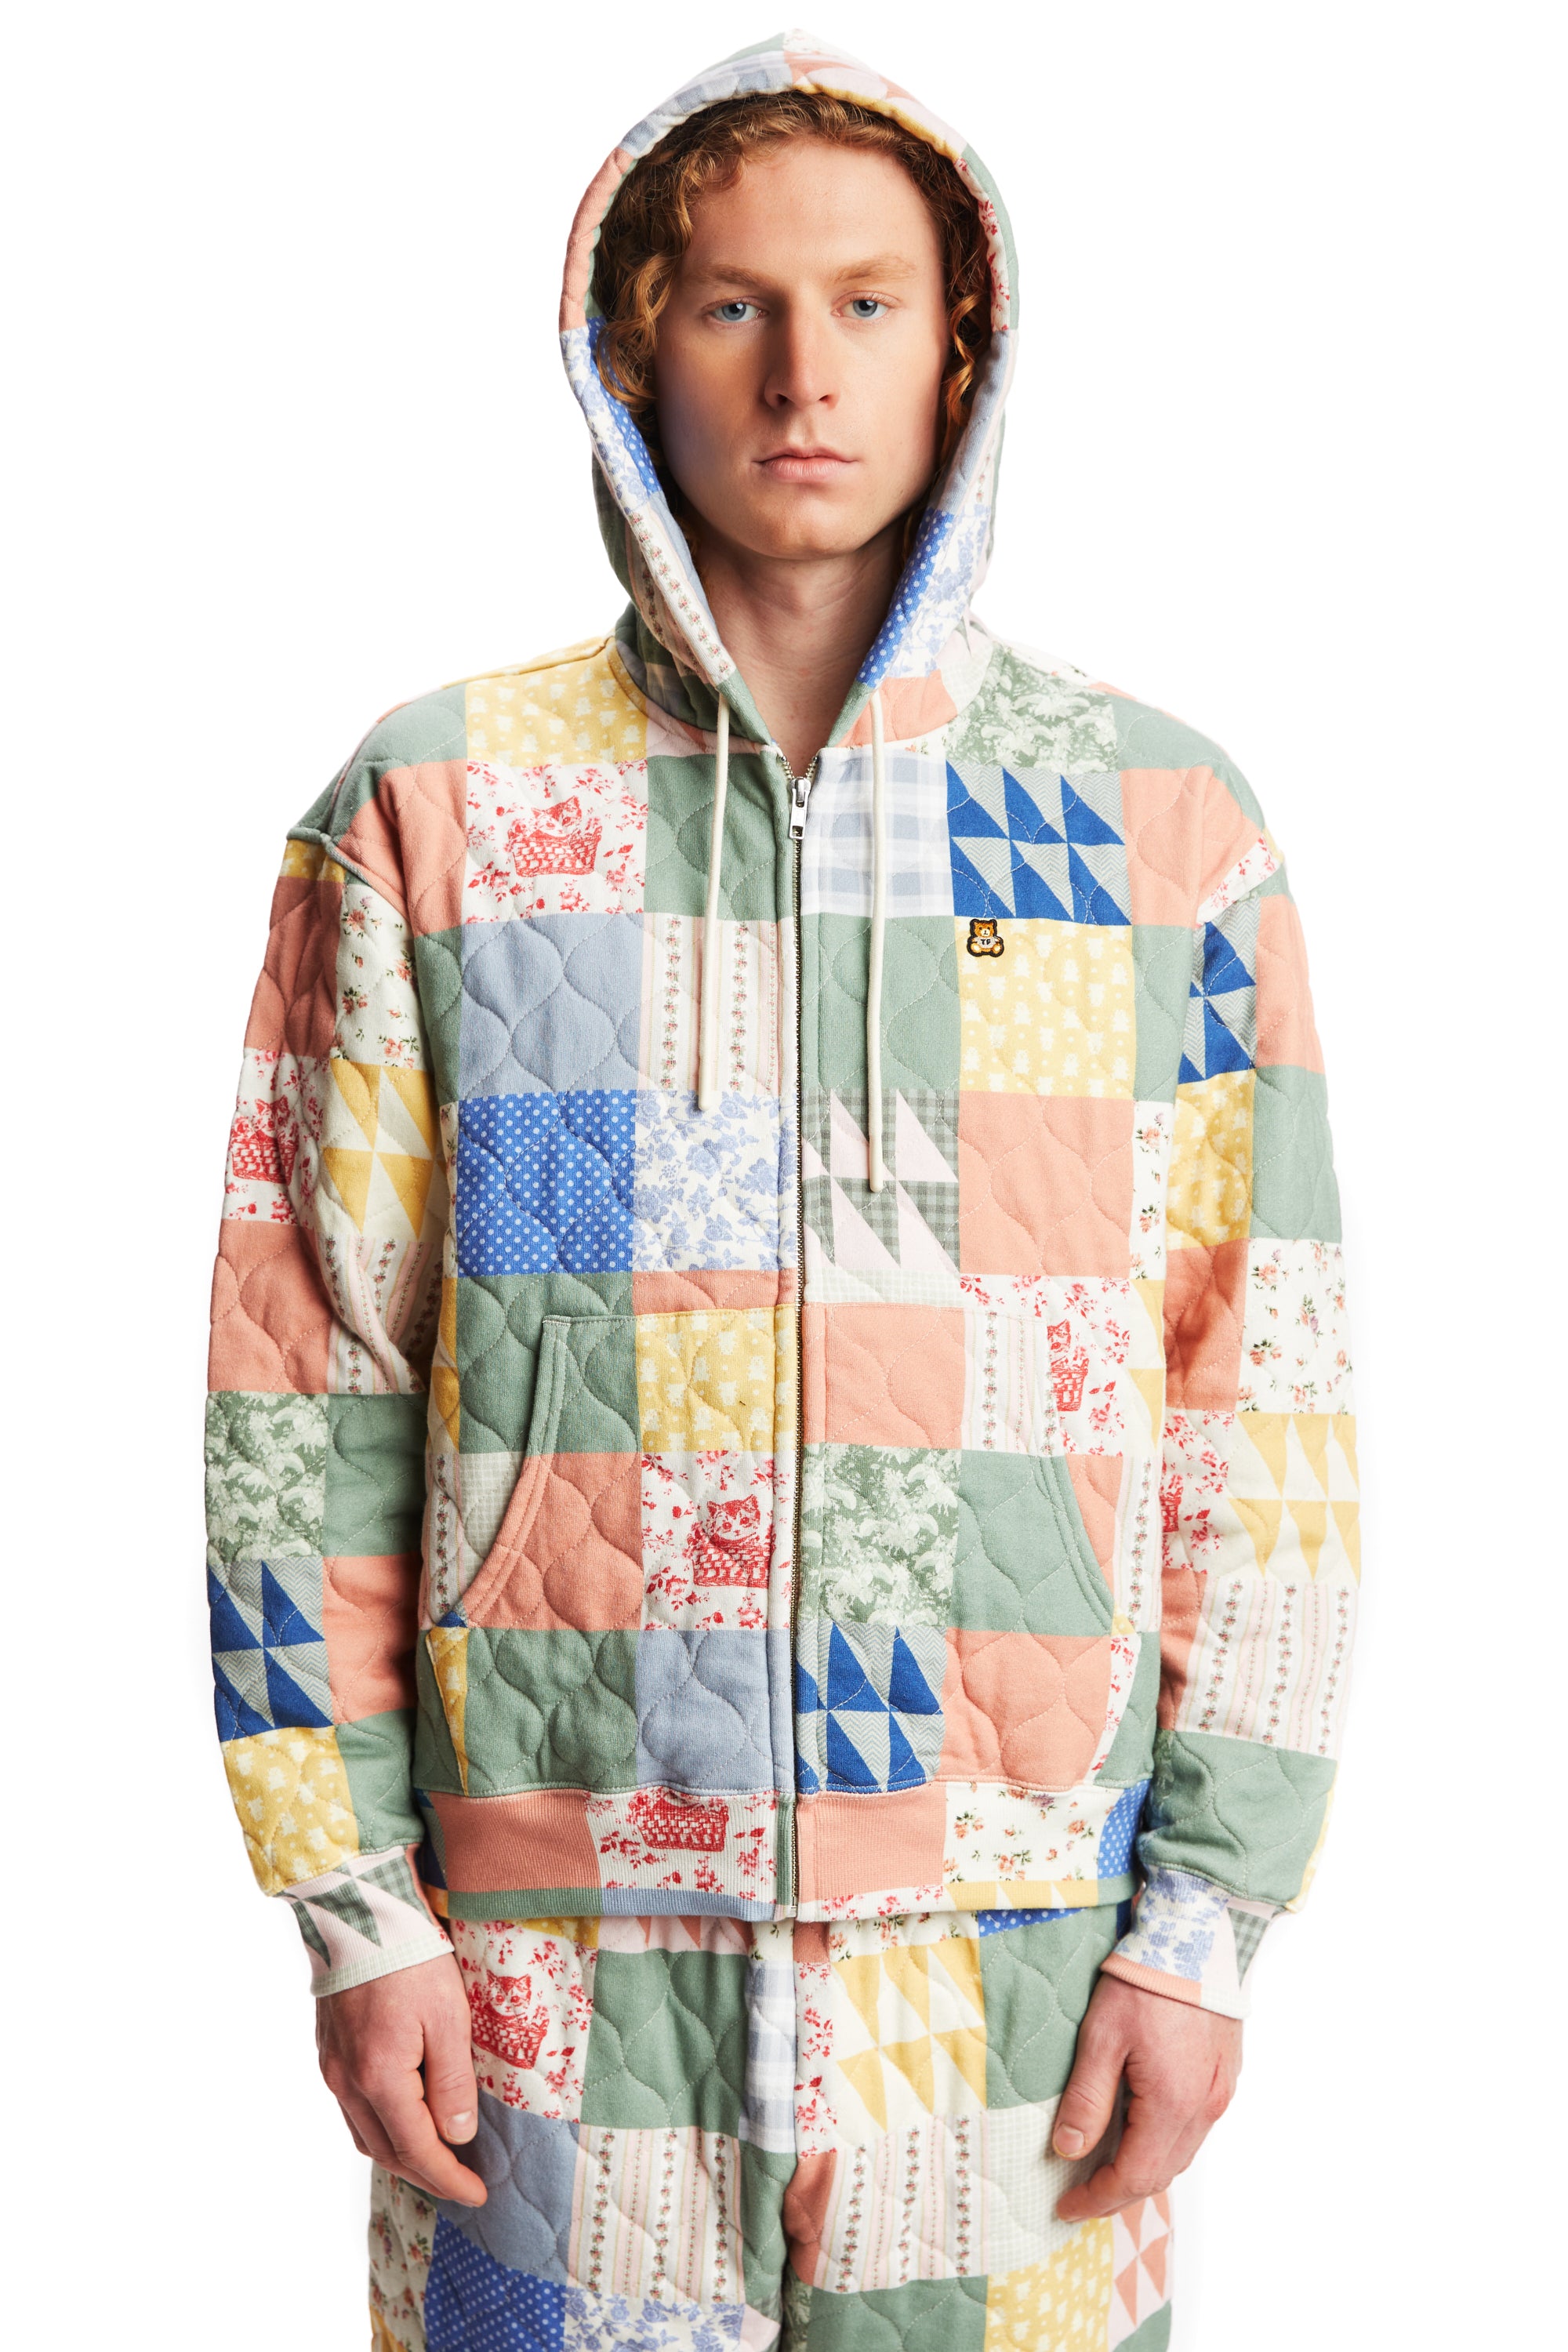 Teddy Fresh quilted hoodie , Size XS, Never